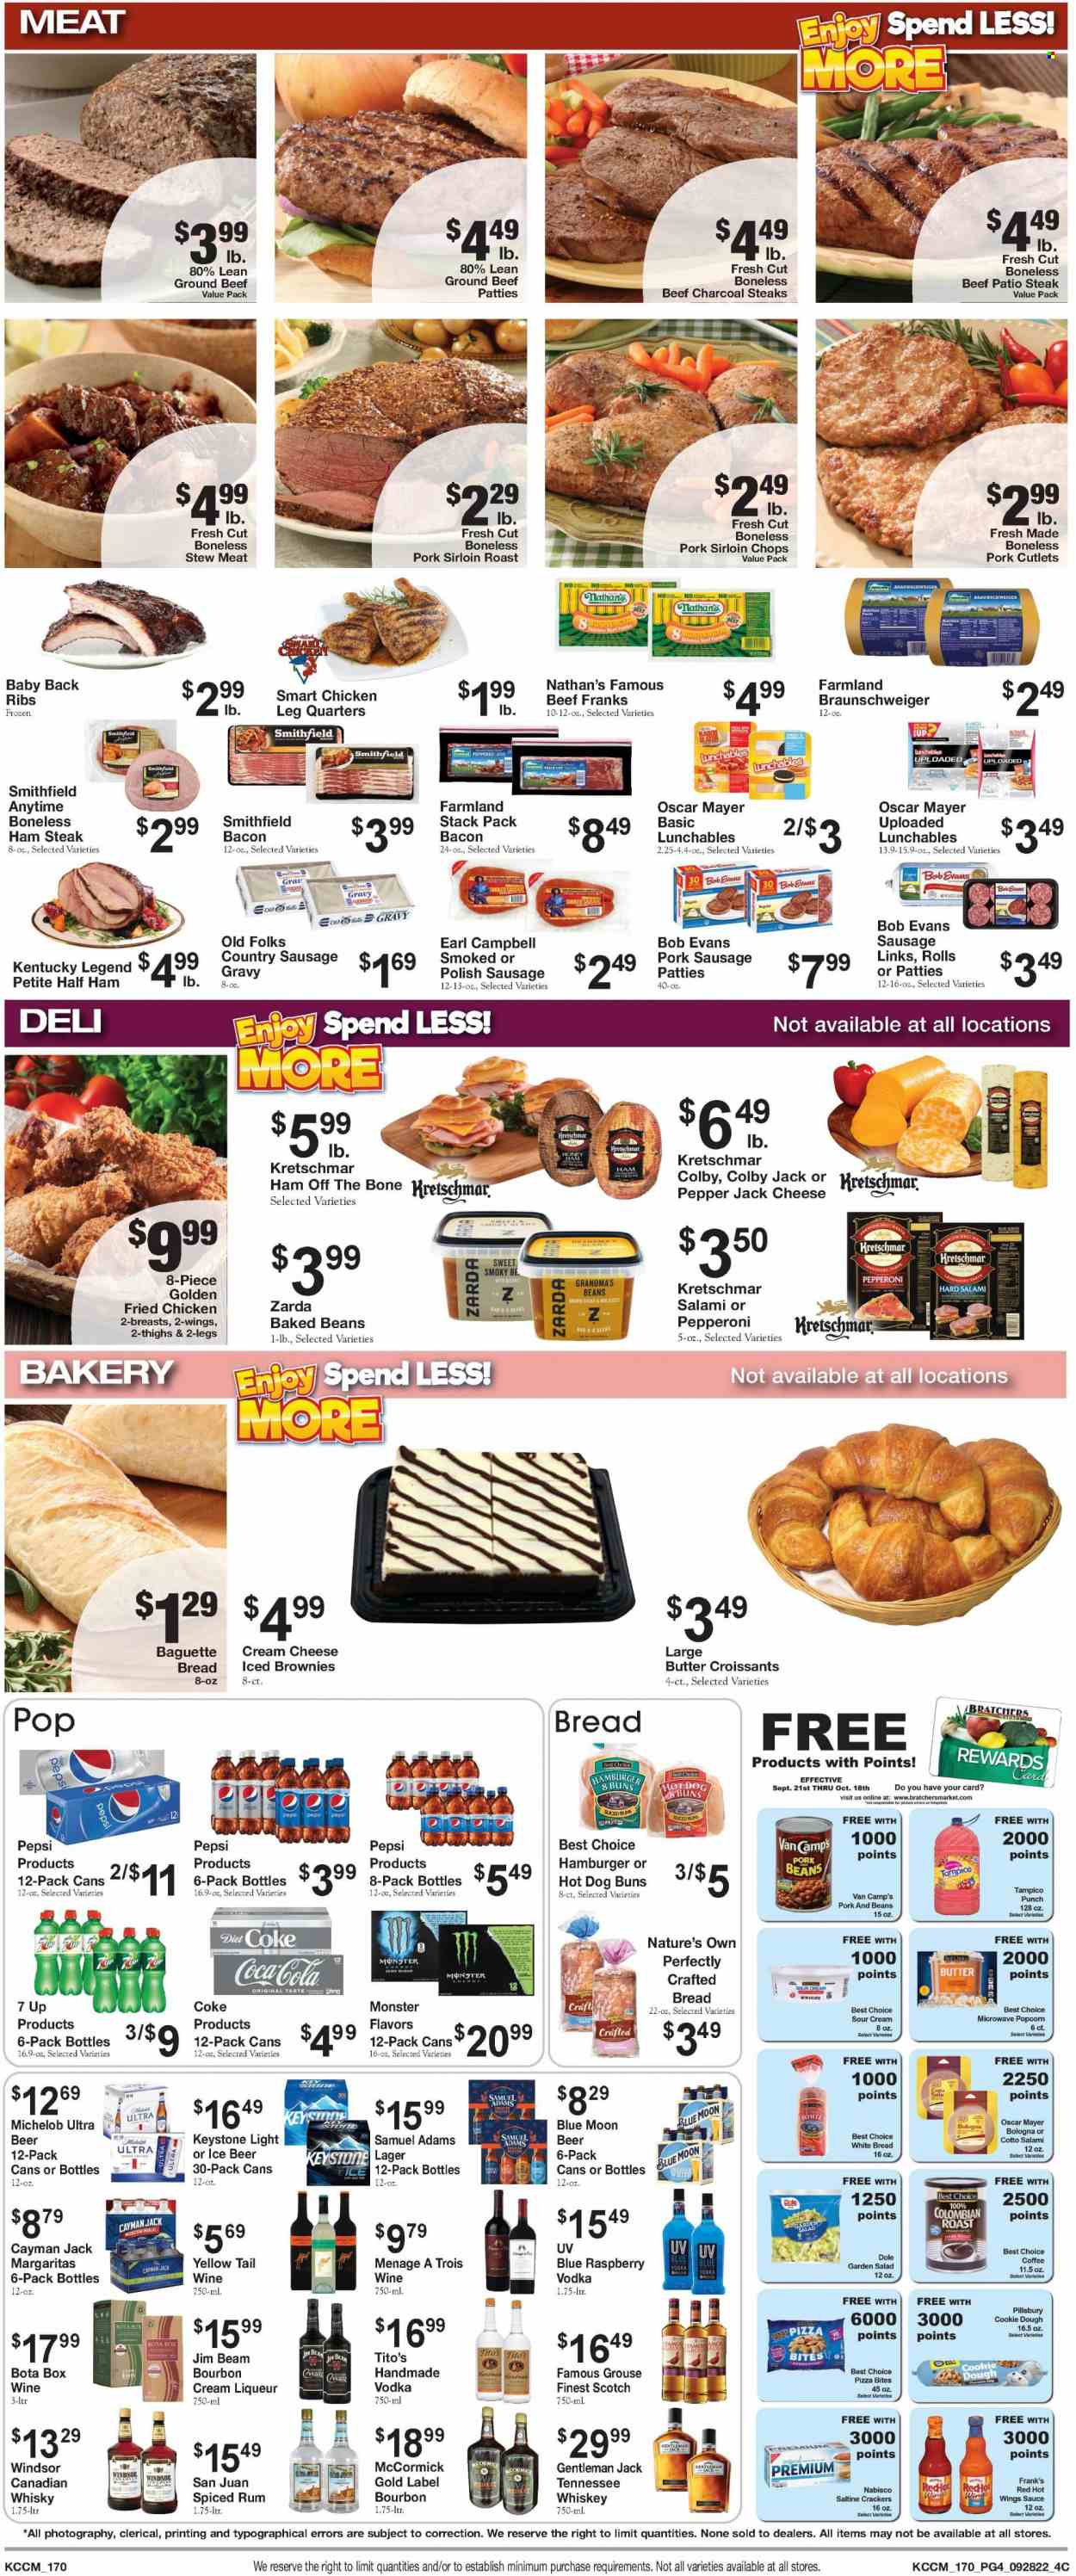 thumbnail - Bratchers Market Flyer - 09/28/2022 - 10/04/2022 - Sales products - stew meat, baguette, bread, white bread, croissant, buns, brownies, salad, Dole, sausage gravy, pizza, sauce, Pillsbury, Lunchables, Bob Evans, bacon, salami, half ham, ham, ham off the bone, Oscar Mayer, smoked sausage, polish sausage, pork sausage, pepperoni, ham steaks, Colby cheese, cream cheese, Pepper Jack cheese, sour cream, cookie dough, crackers, popcorn, cane sugar, baked beans, Coca-Cola, Pepsi, Monster, Diet Coke, 7UP, fruit punch, coffee, ground coffee, liqueur, rum, spiced rum, Tennessee Whiskey, vodka, whiskey, Jim Beam, whisky, beer, Lager, Keystone, chicken legs, beef meat, ground beef, steak, pork loin, pork meat, pork ribs, pork back ribs, Nature's Own, Blue Moon, Michelob. Page 4.